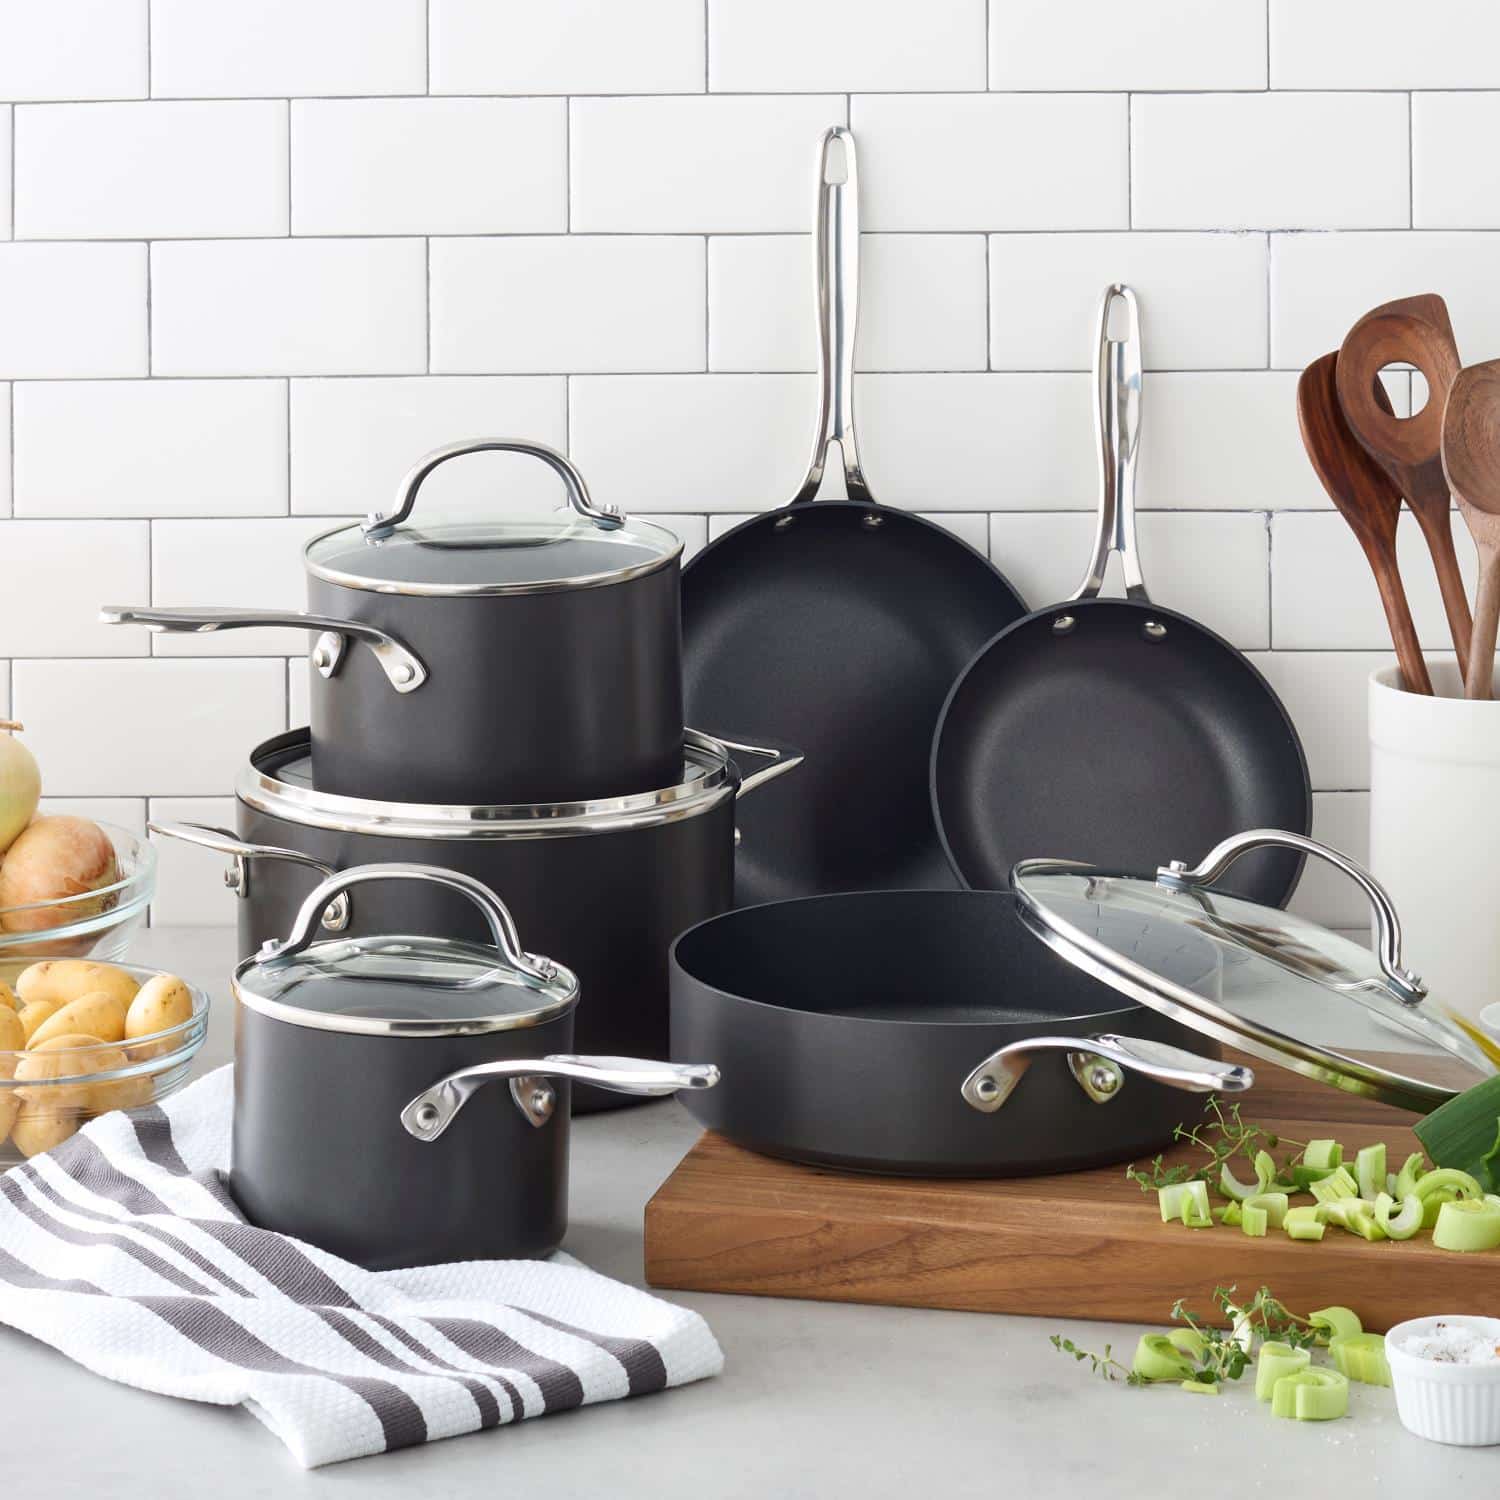 how to care for nonstick, can hard anodized aluminum be used on induction, dishwasher safe